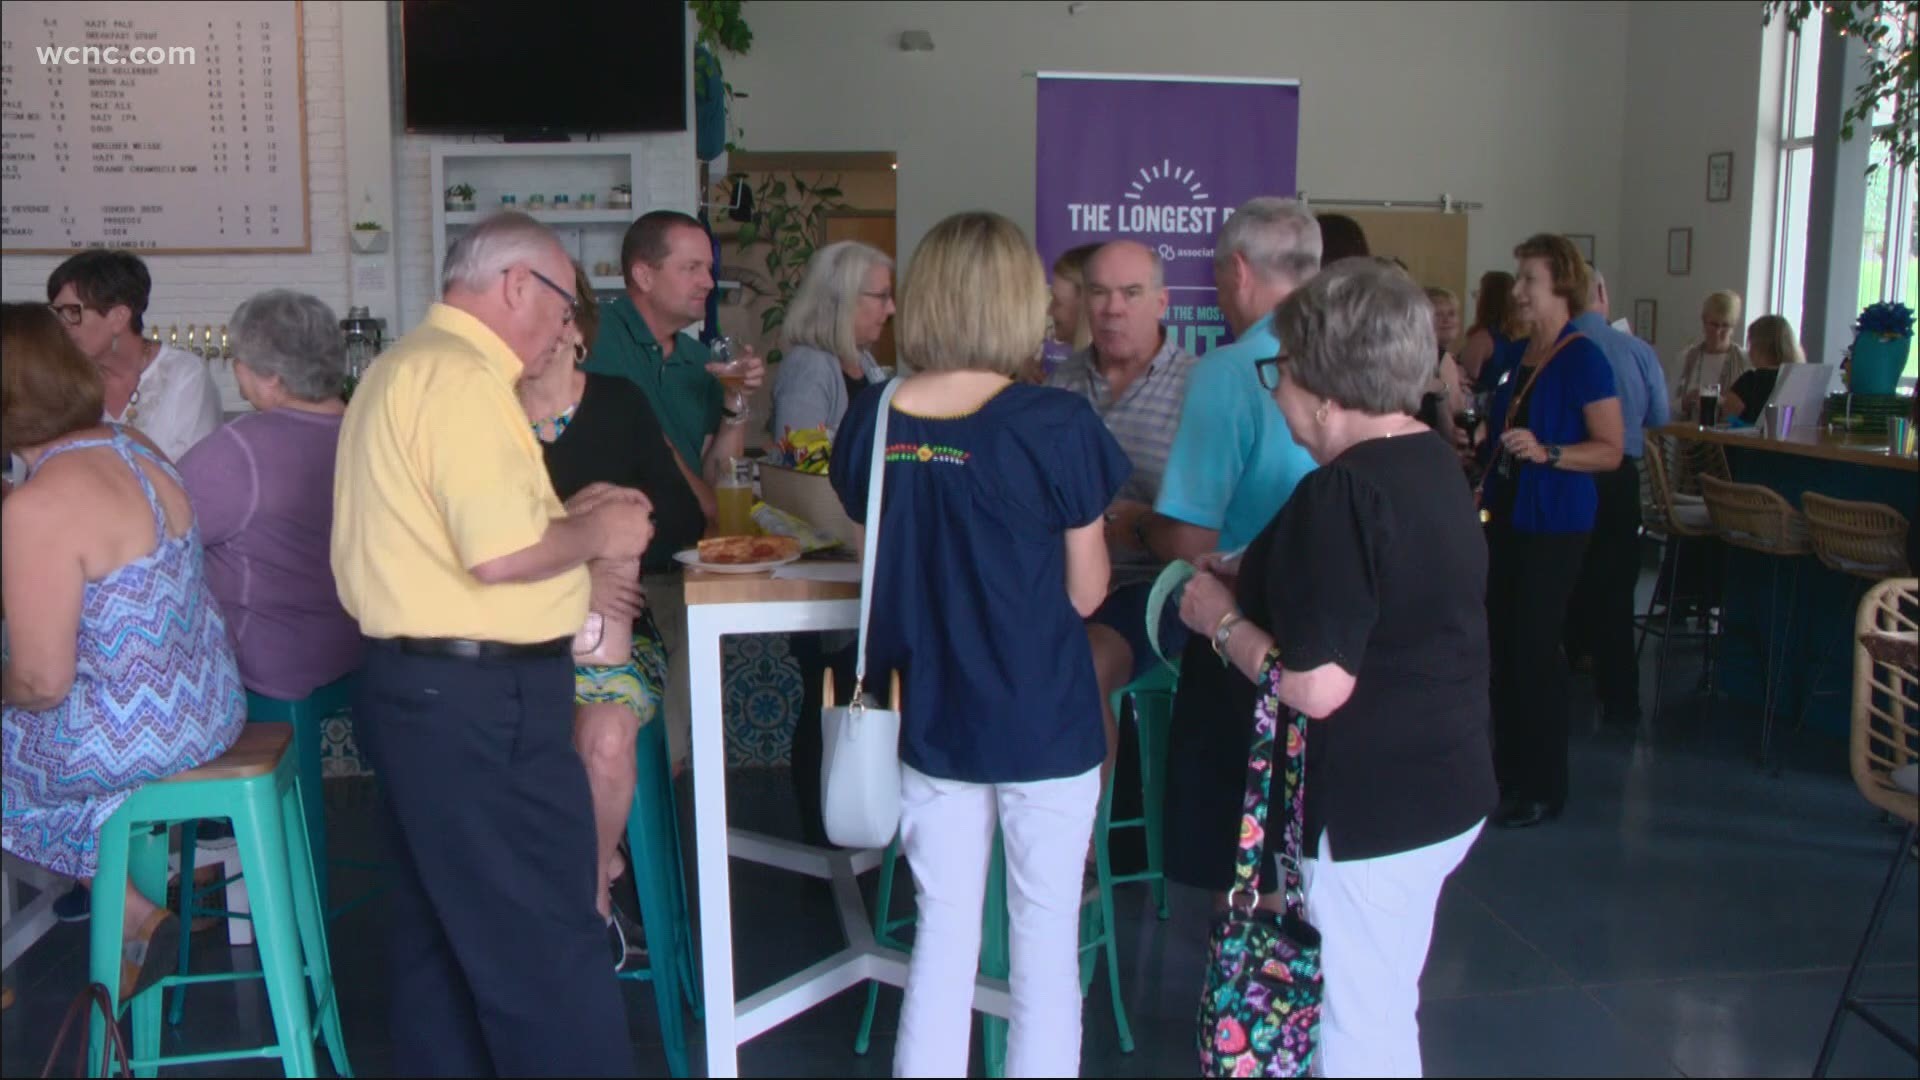 First Light Home Care & Edge City Brewery held a fundraiser on June 22 to benefit the Alzheimer's Association.